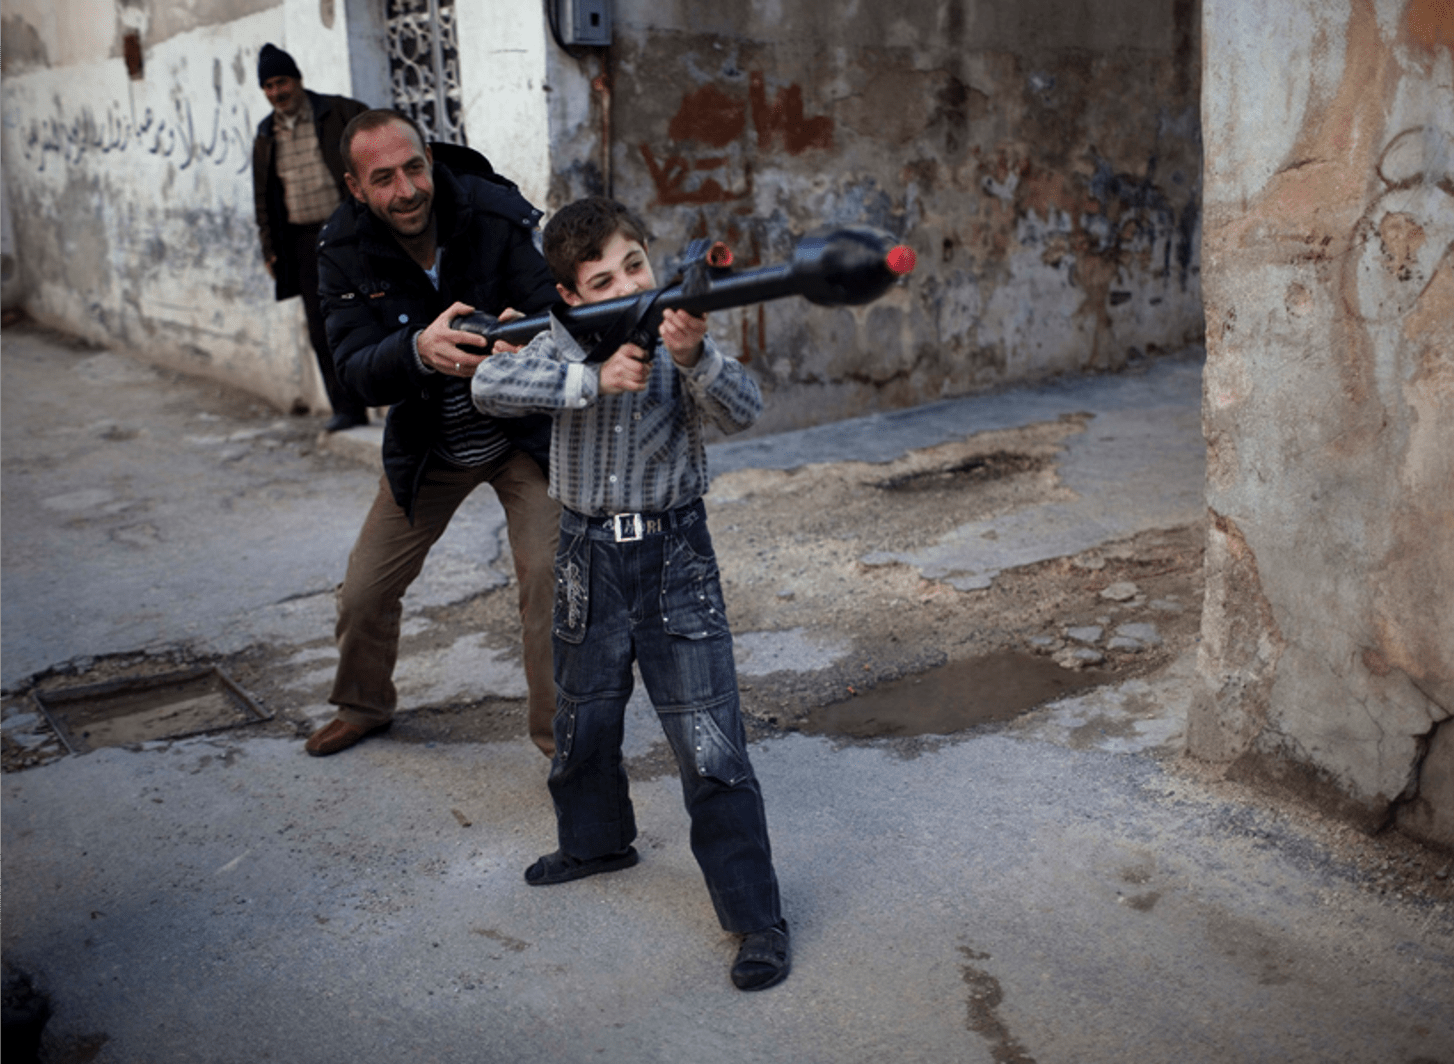 Pulitzer-Winning Photos: A man teaches Bilal, 11, how to use a toy rocket propelled grenade in Idlib, northern Syria, March 4, 2012. (Rodrigo Abd, Associated Press - March 4, 2012)